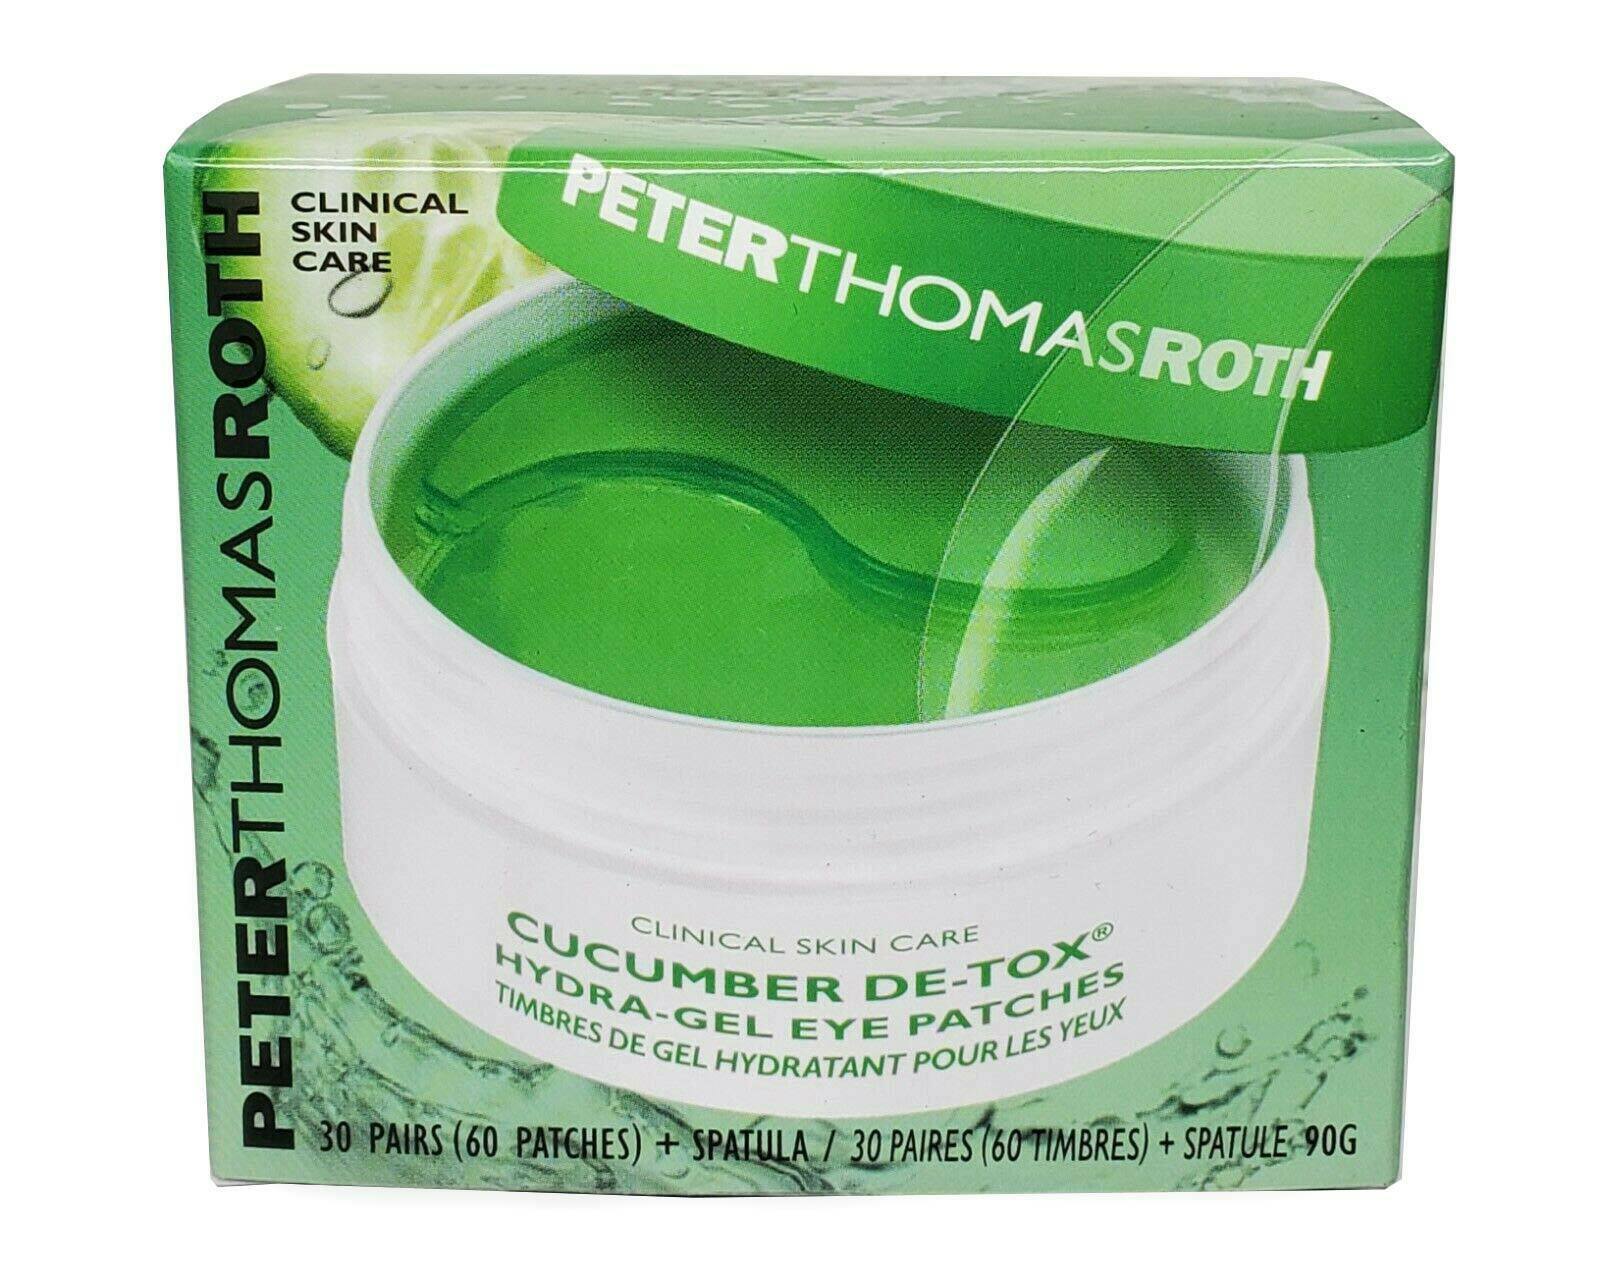 Peter Thomas Roth Cucumber De-Tox Hydra-Gel Eye Patches, 30 pairs (60 patches)